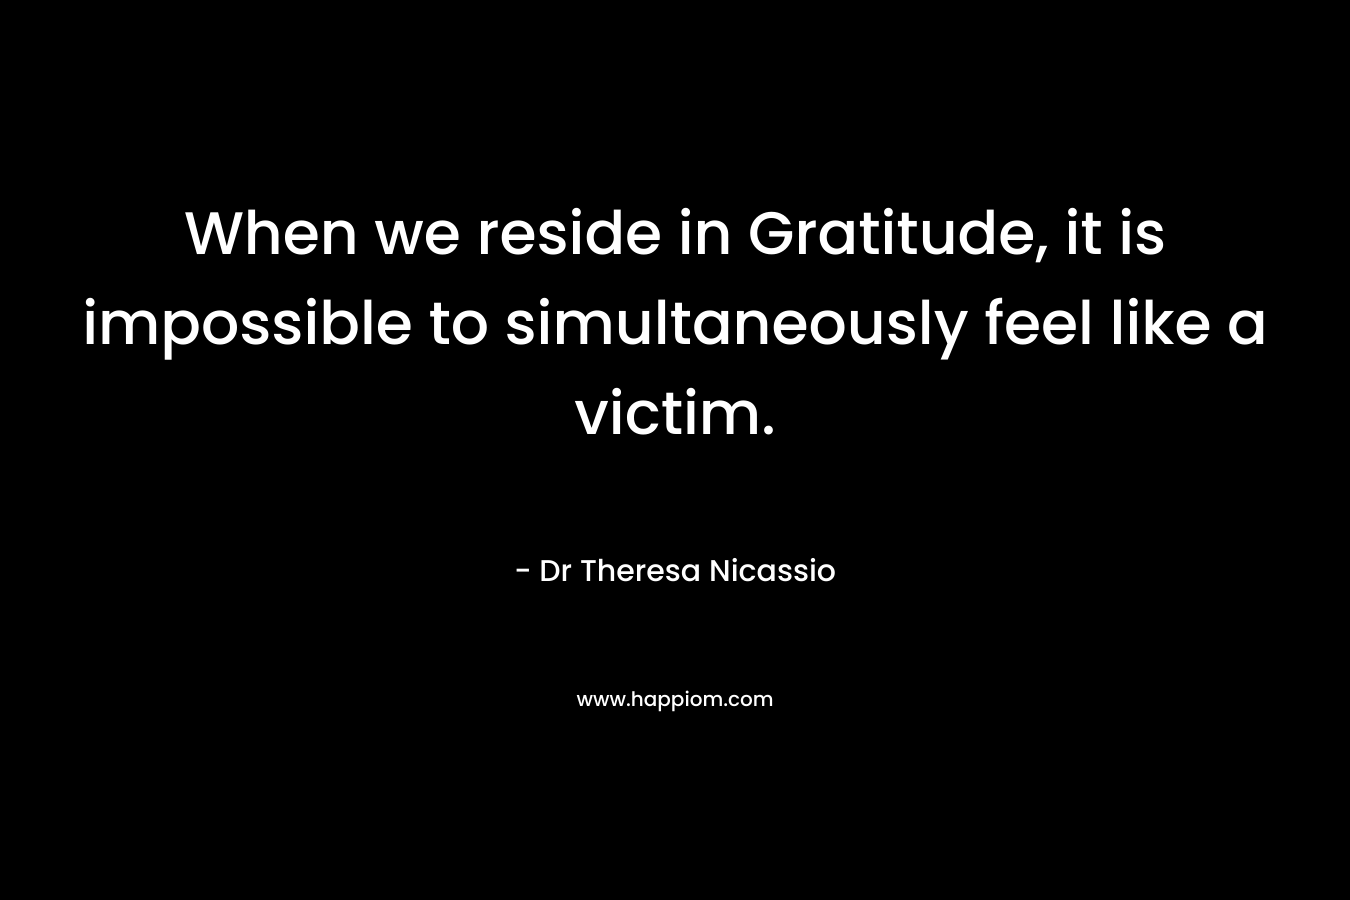 When we reside in Gratitude, it is impossible to simultaneously feel like a victim. – Dr Theresa Nicassio